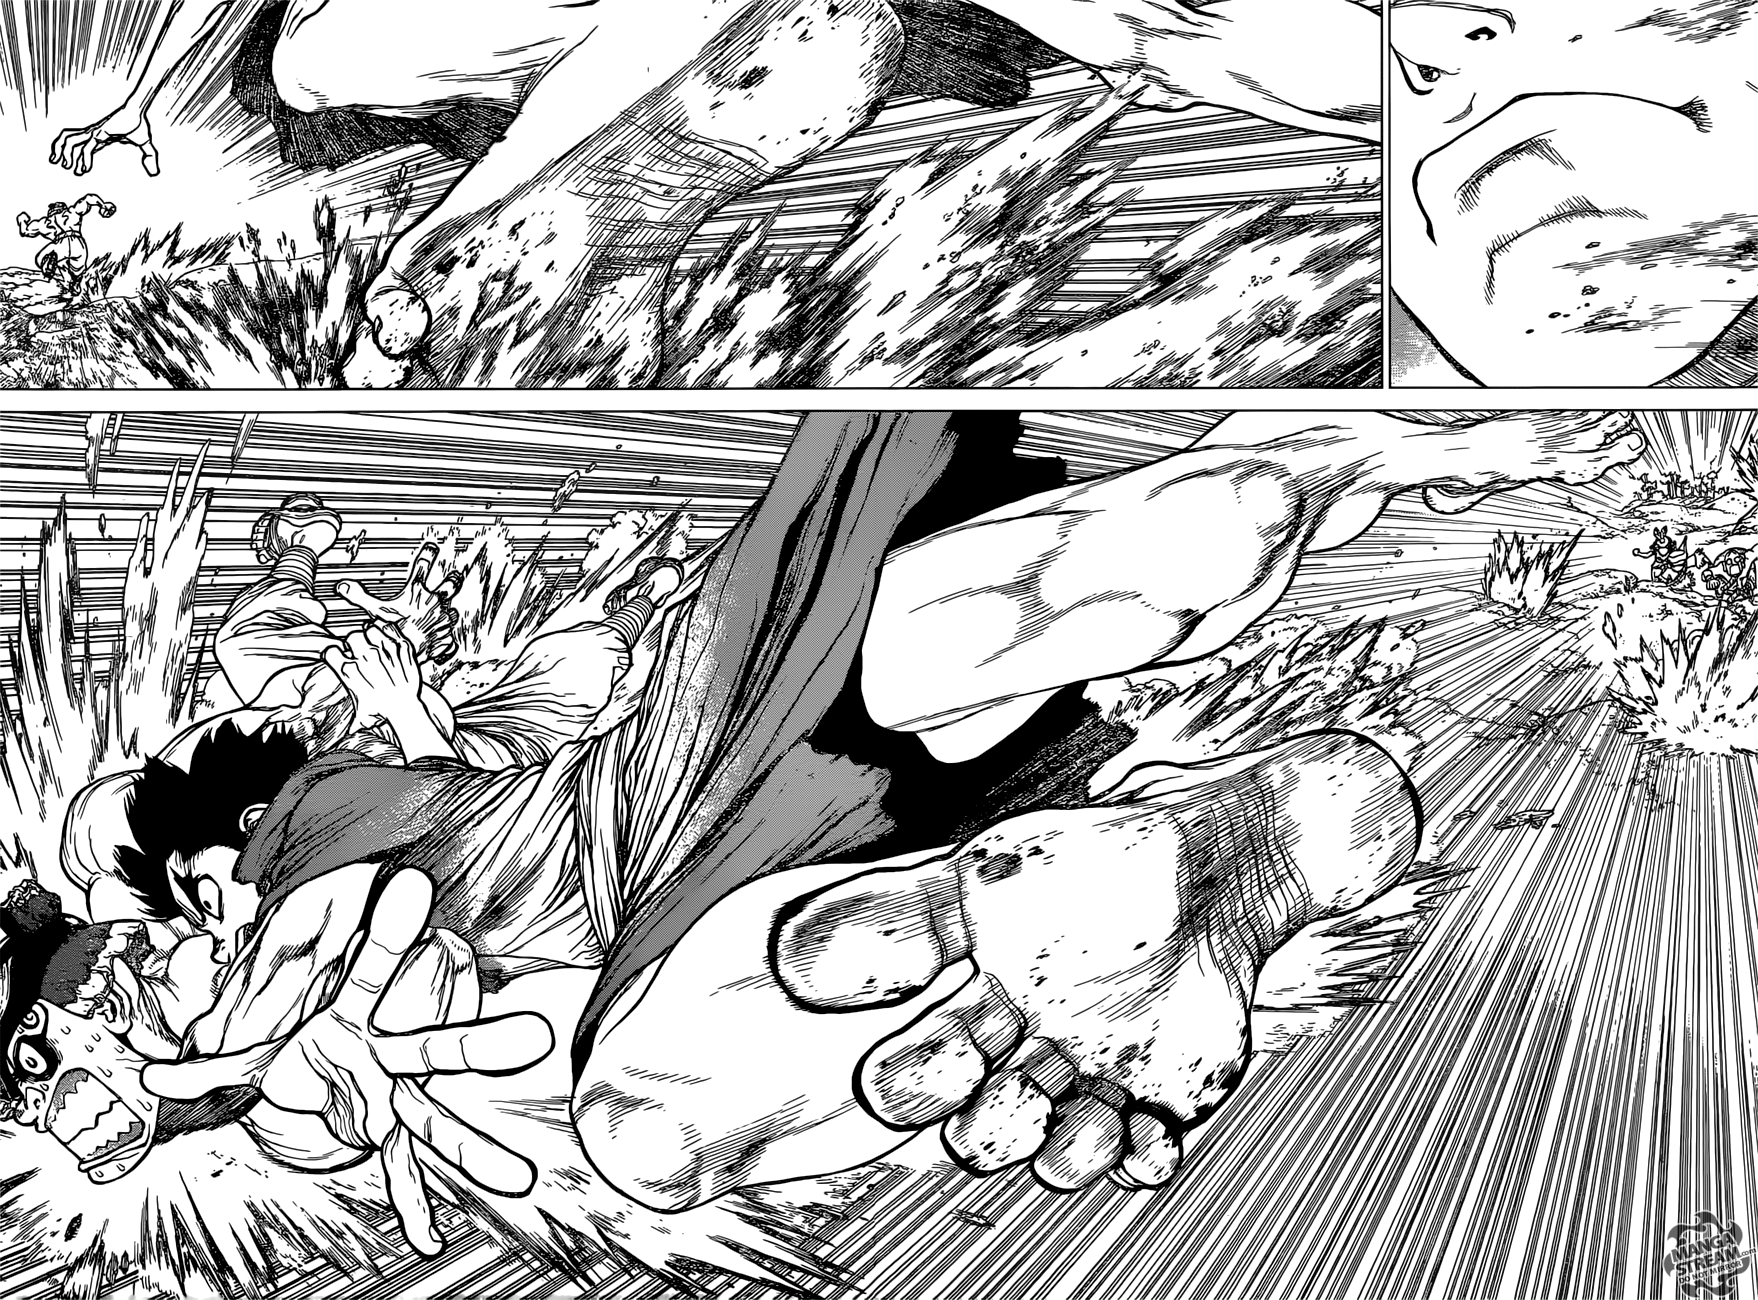 Dr. Stone Chapter 133